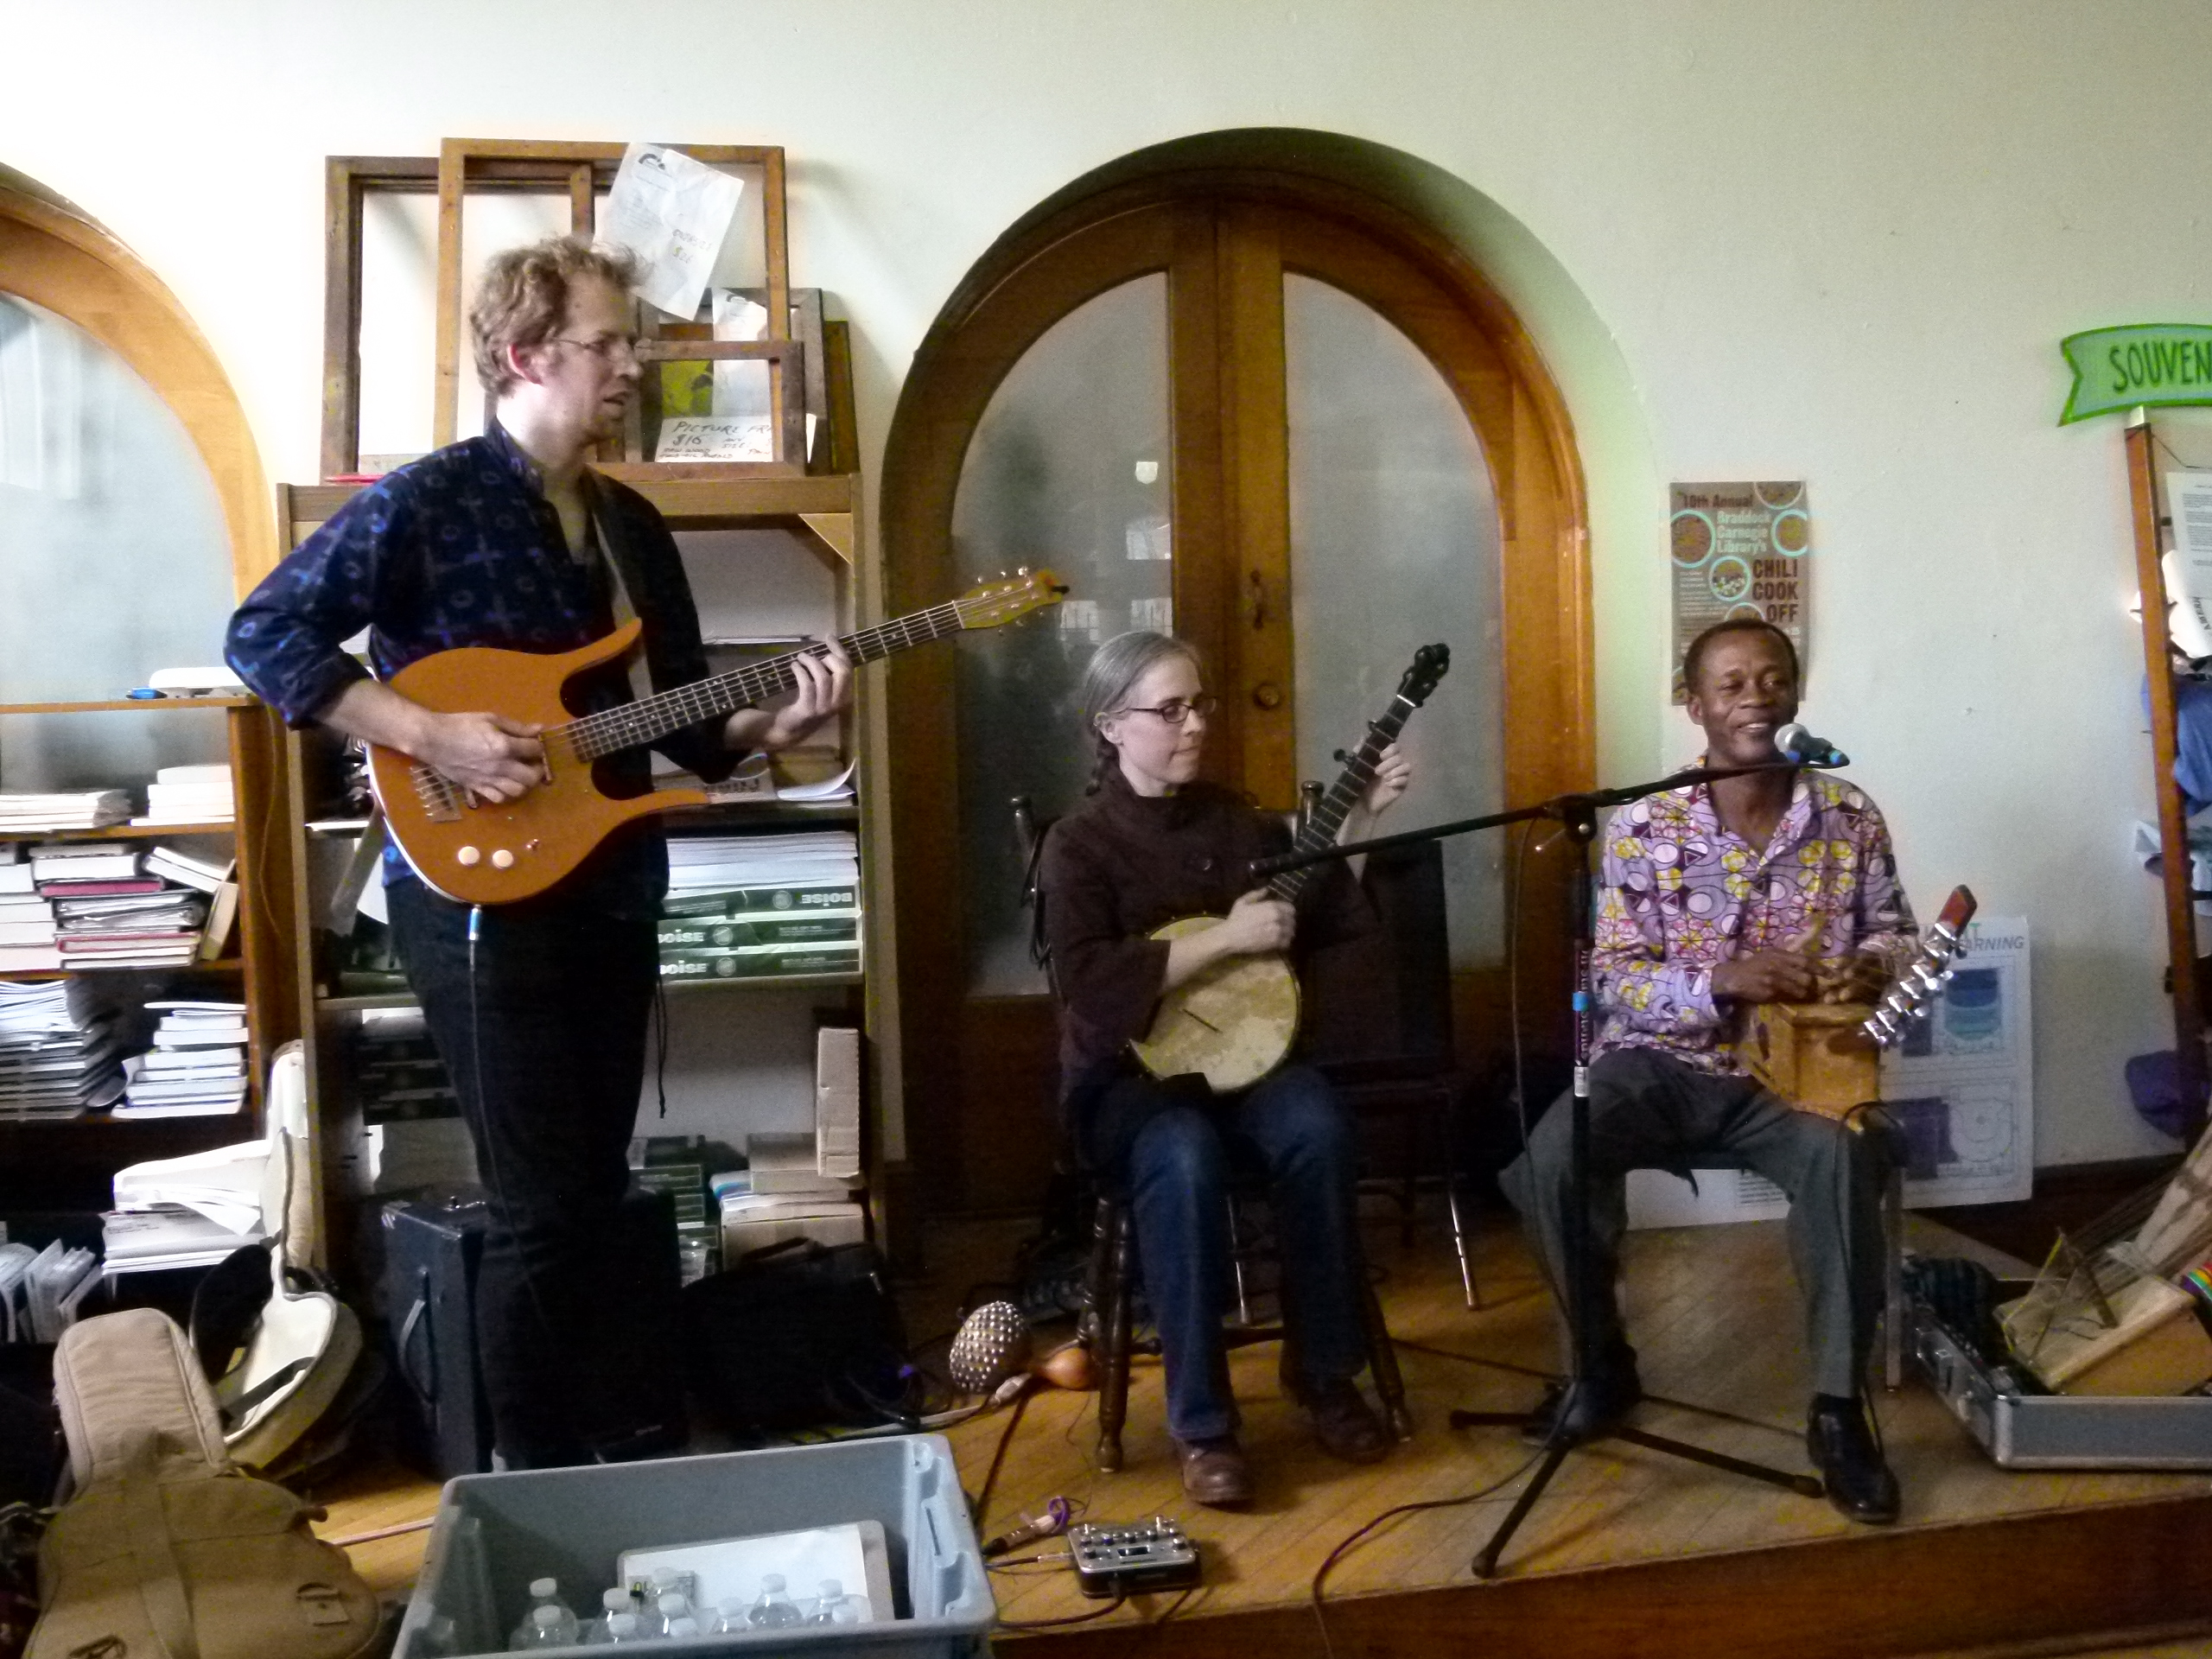 Live music was provided by (l. to r.) Colter Harper, Emily Pinkerton, and Osei Korankye.